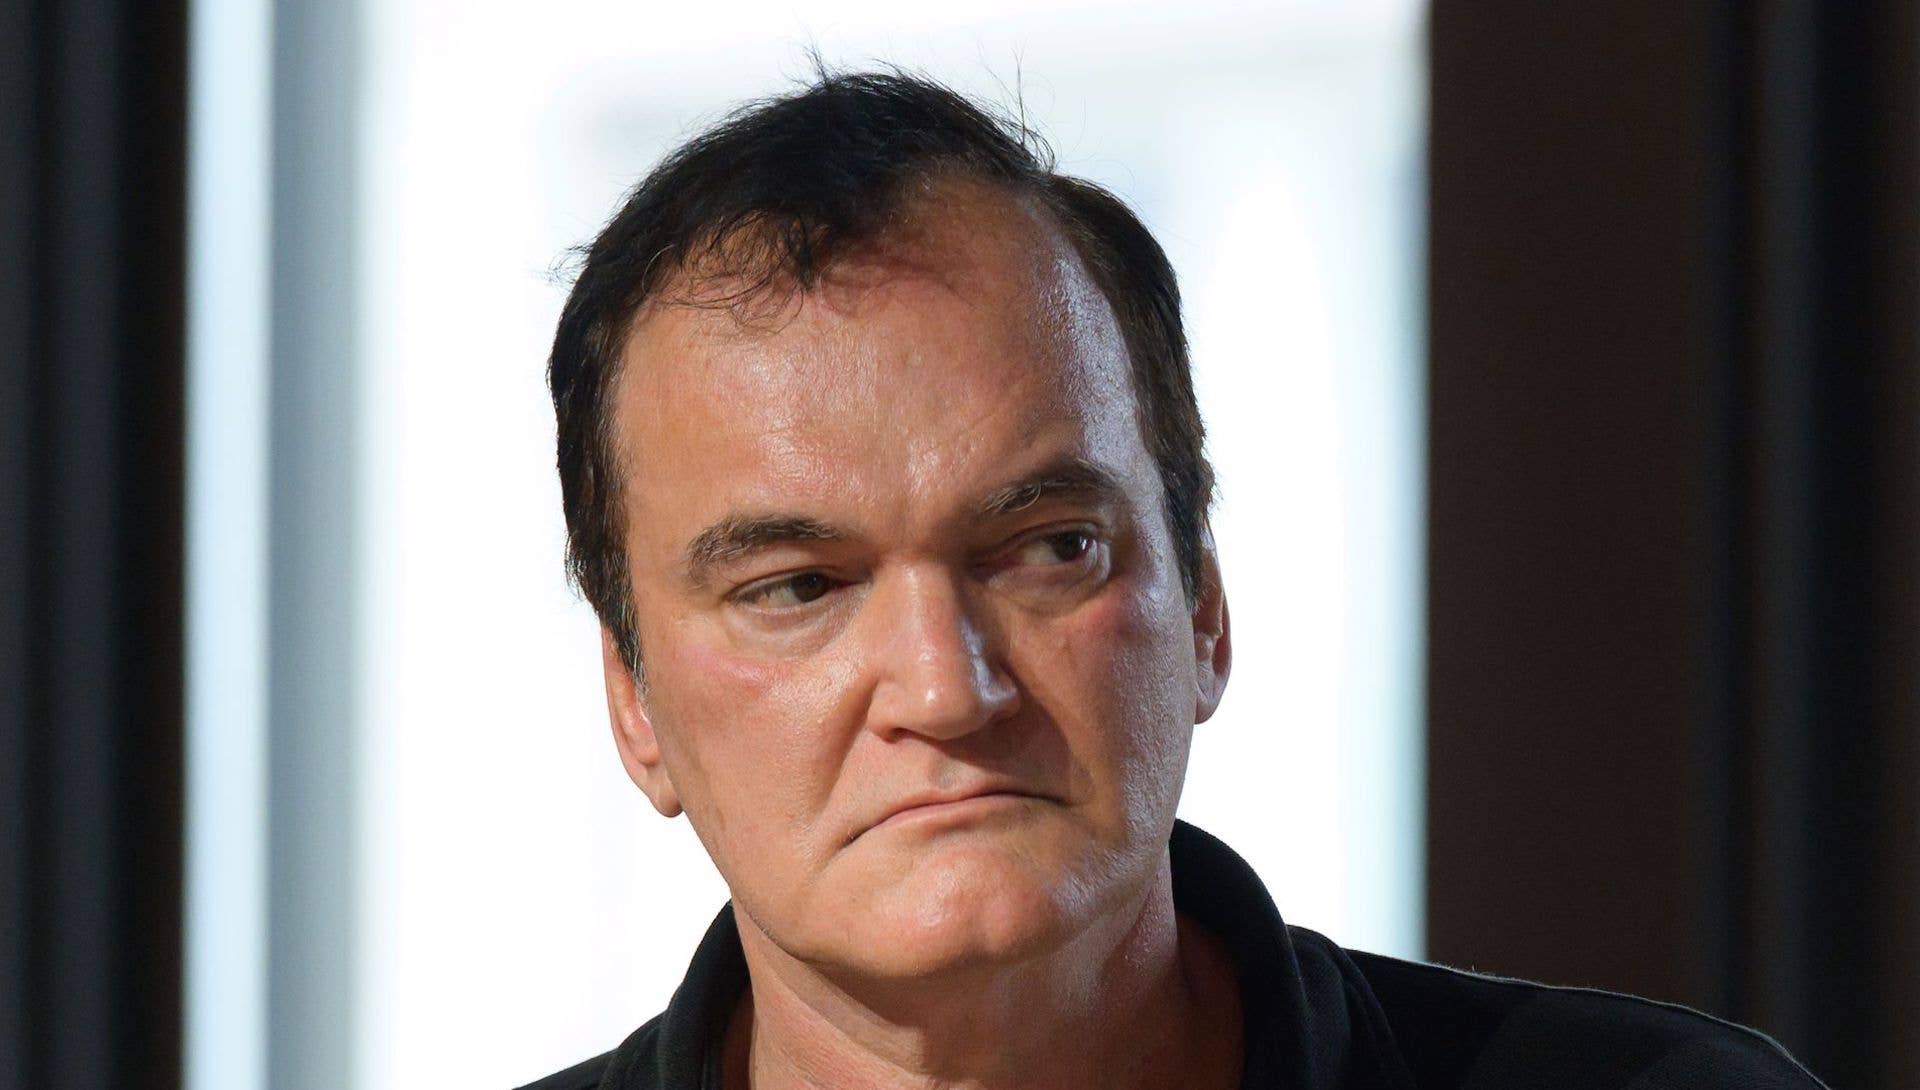 Quentin Tarantino speaks at panel discussion on "Pulp Fiction" NFTs